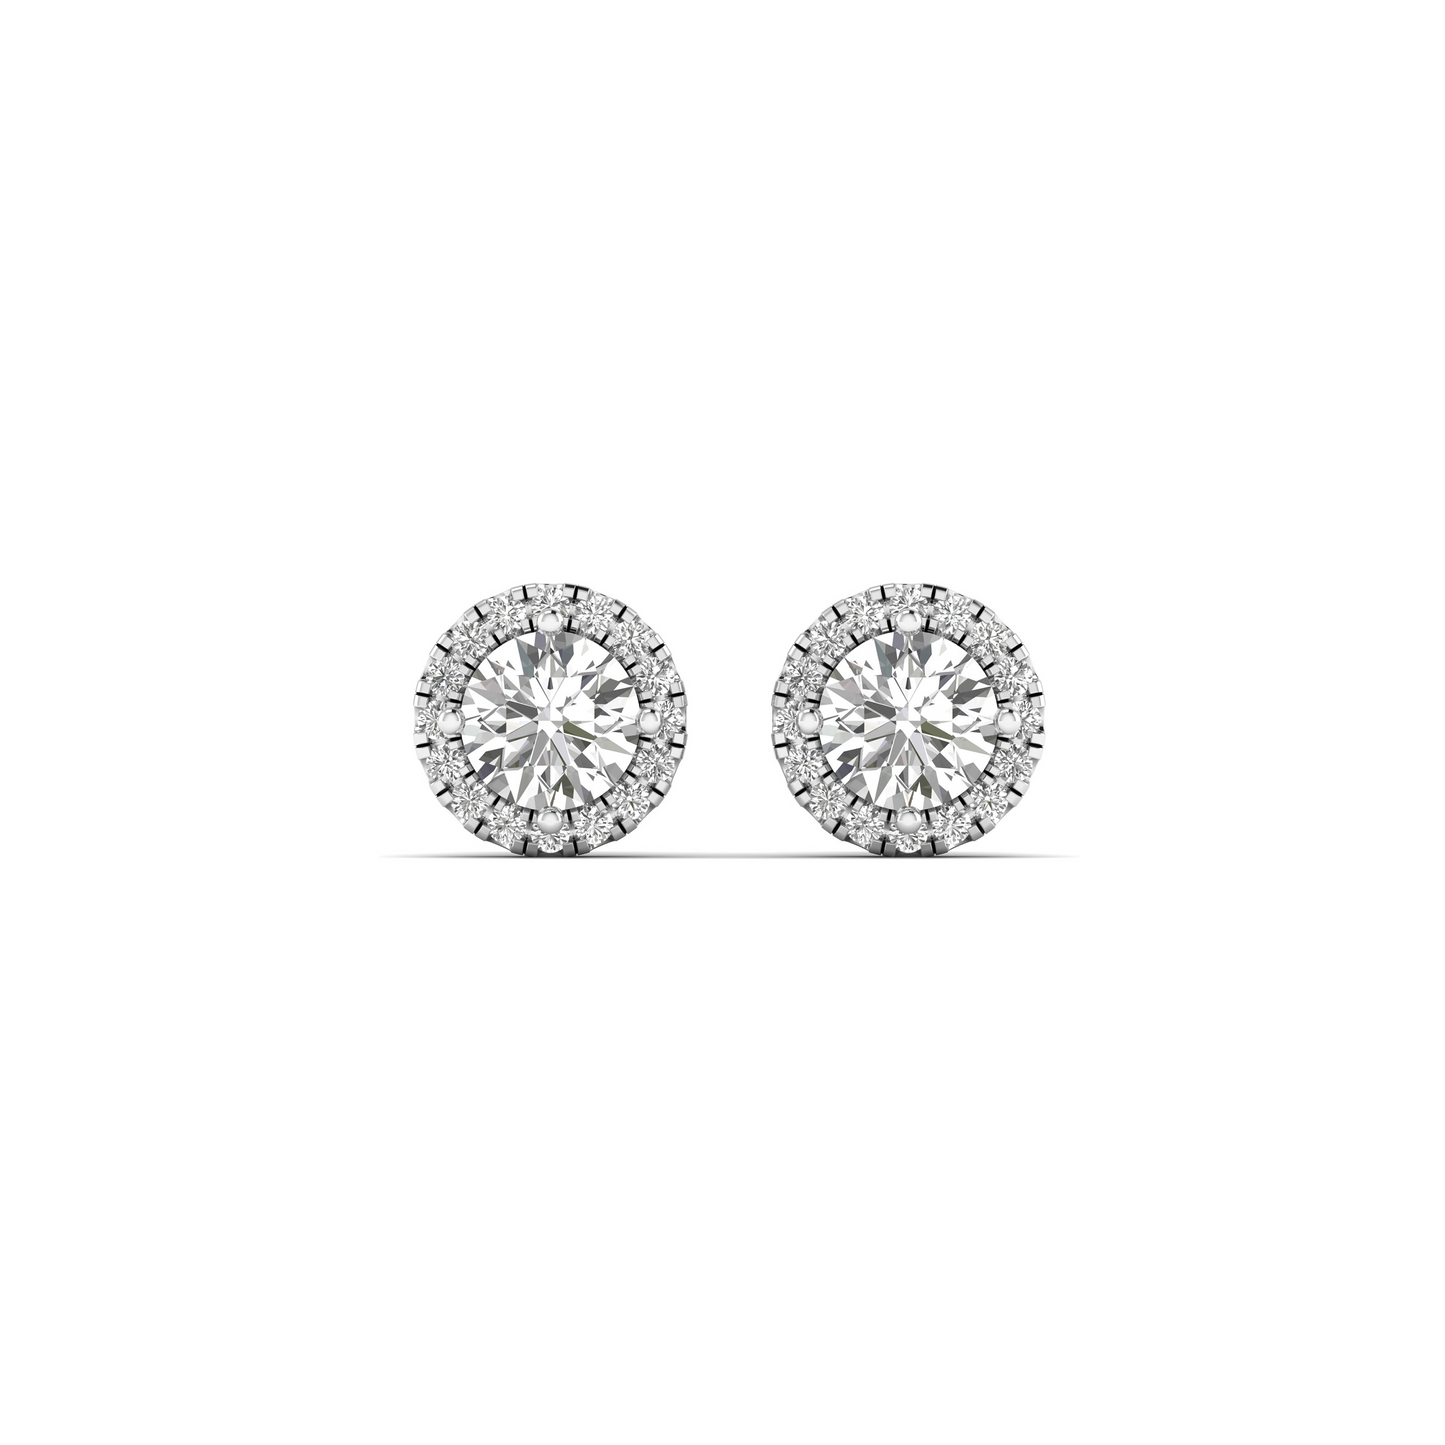 Dazzling Brilliance: Exquisite Round Lab-Grown Diamond Earrings – Ethical Elegance Redefined!